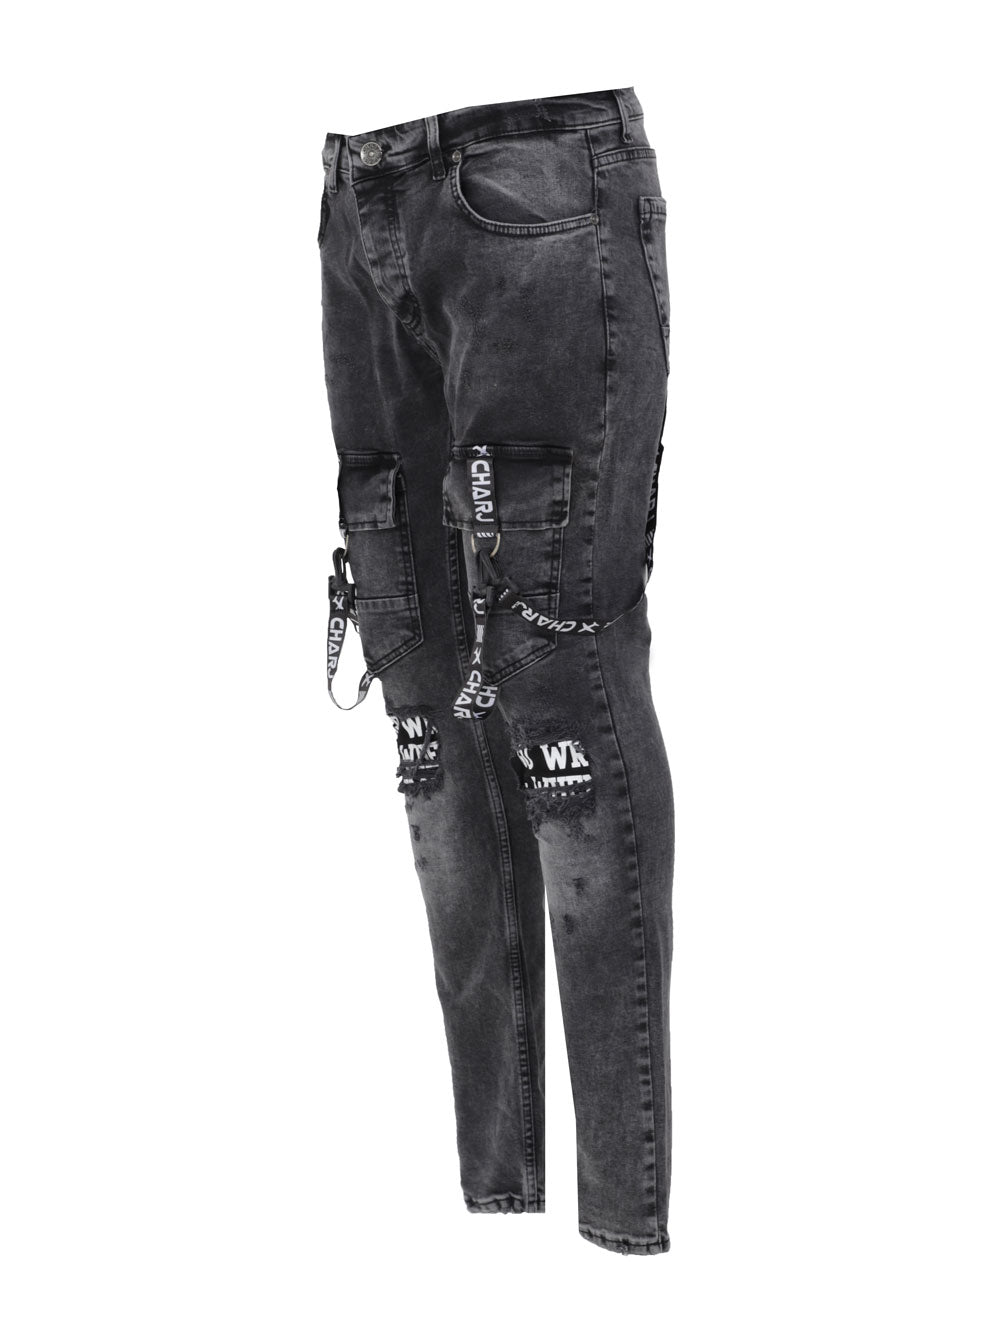 A pair of TORNADO BLACK jeans with zippers and patches made of elastic fabric.